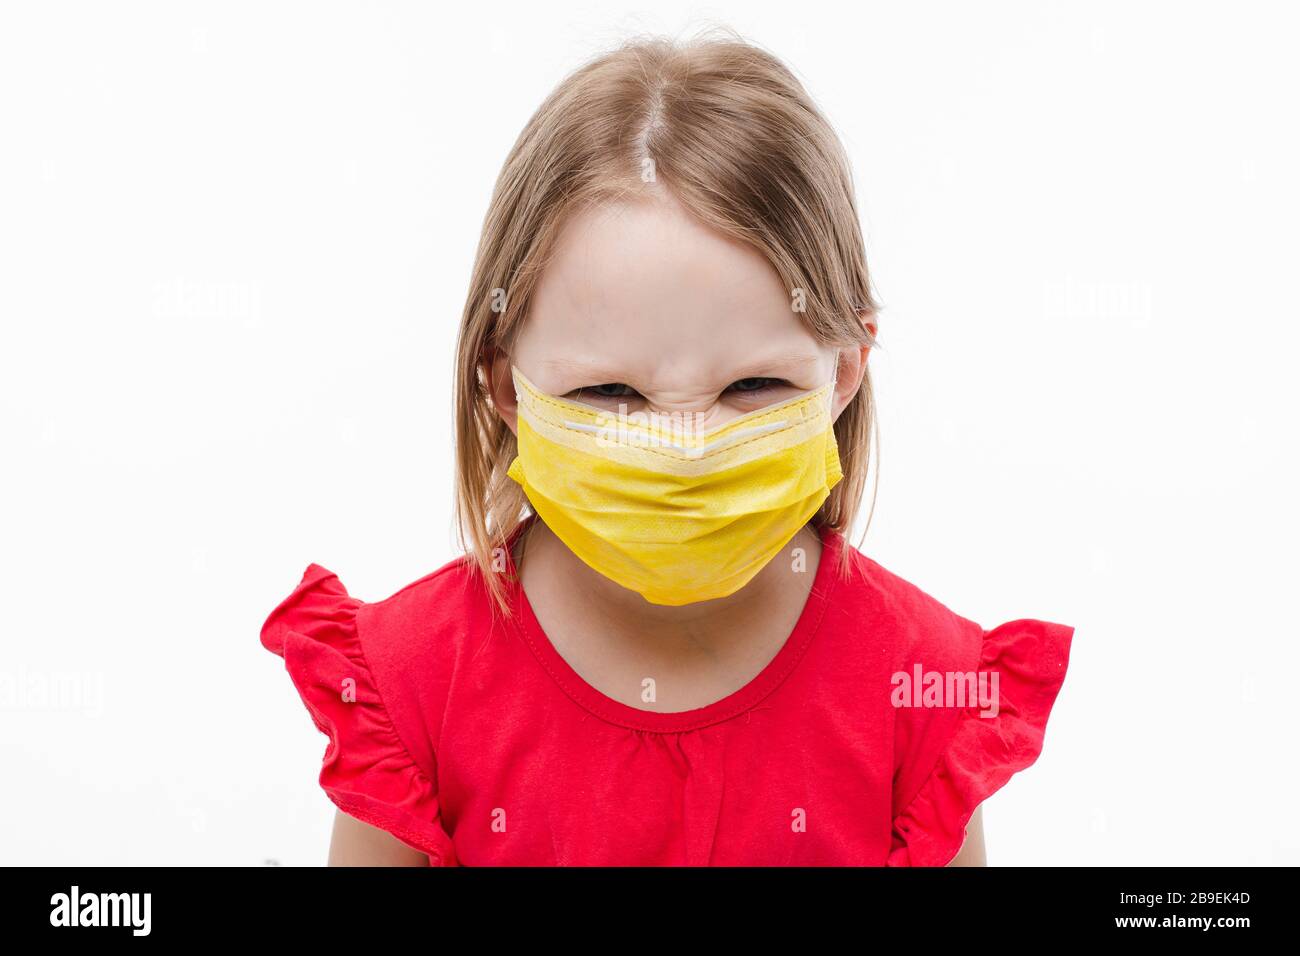 Download Portrait Of Little Girl With Yellow Medical Mask On Her Face Rages Isolated On White Background Stock Photo Alamy PSD Mockup Templates